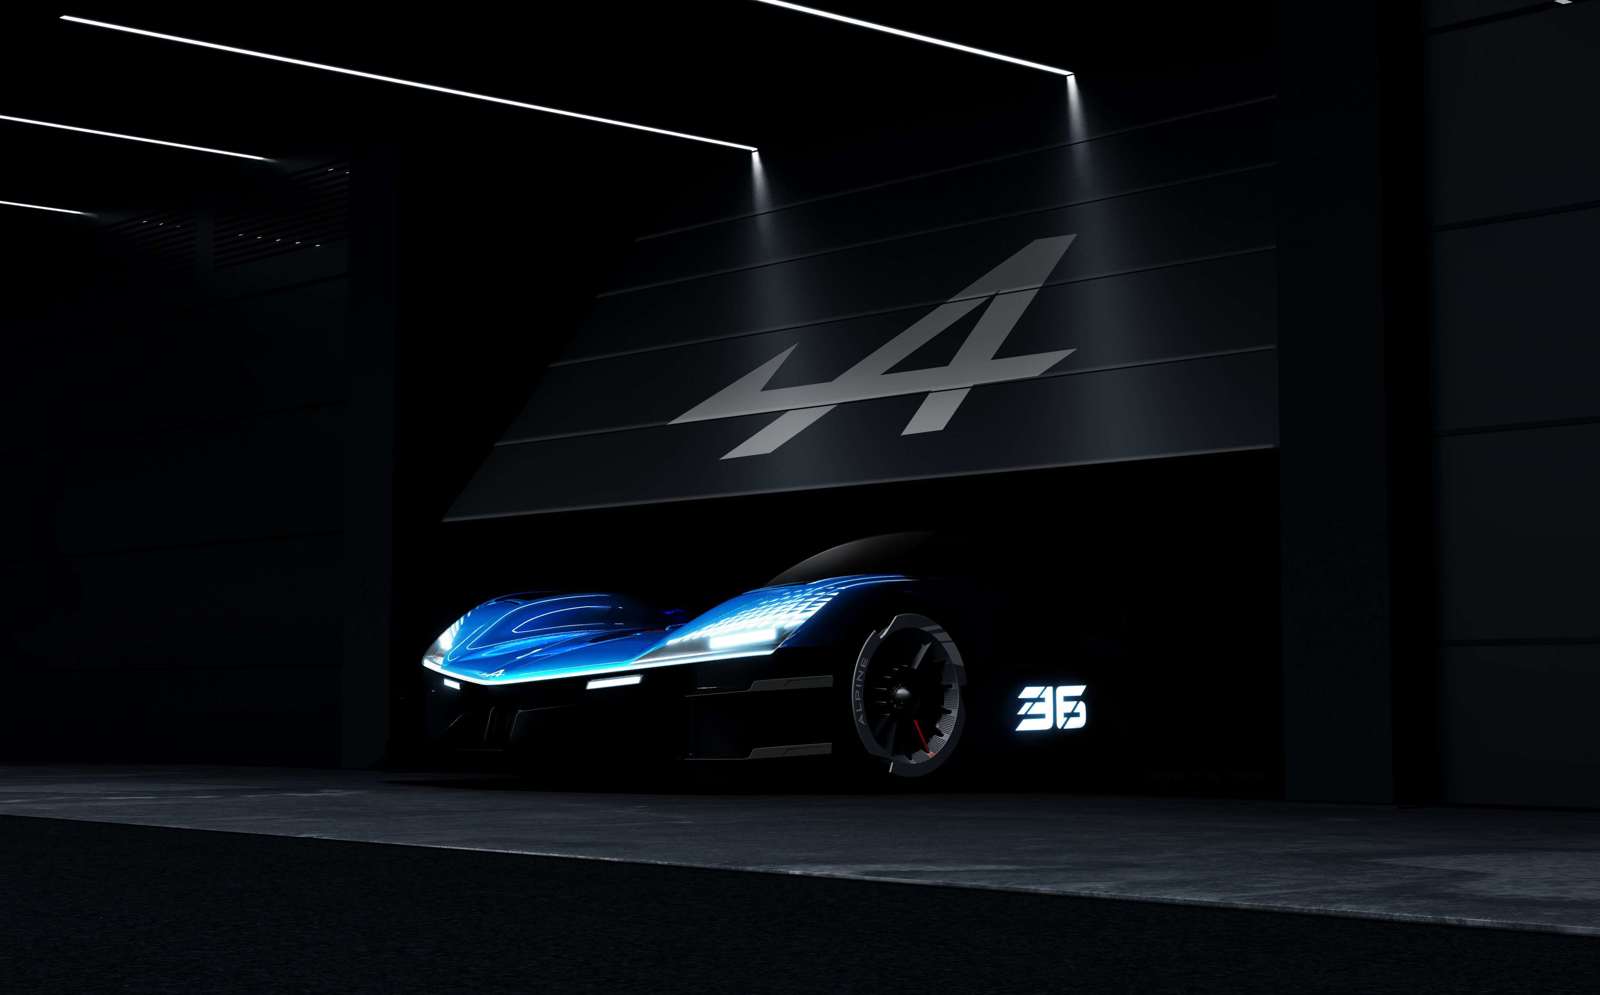 This ultra powerful hypercar is set for debut at World Endurance